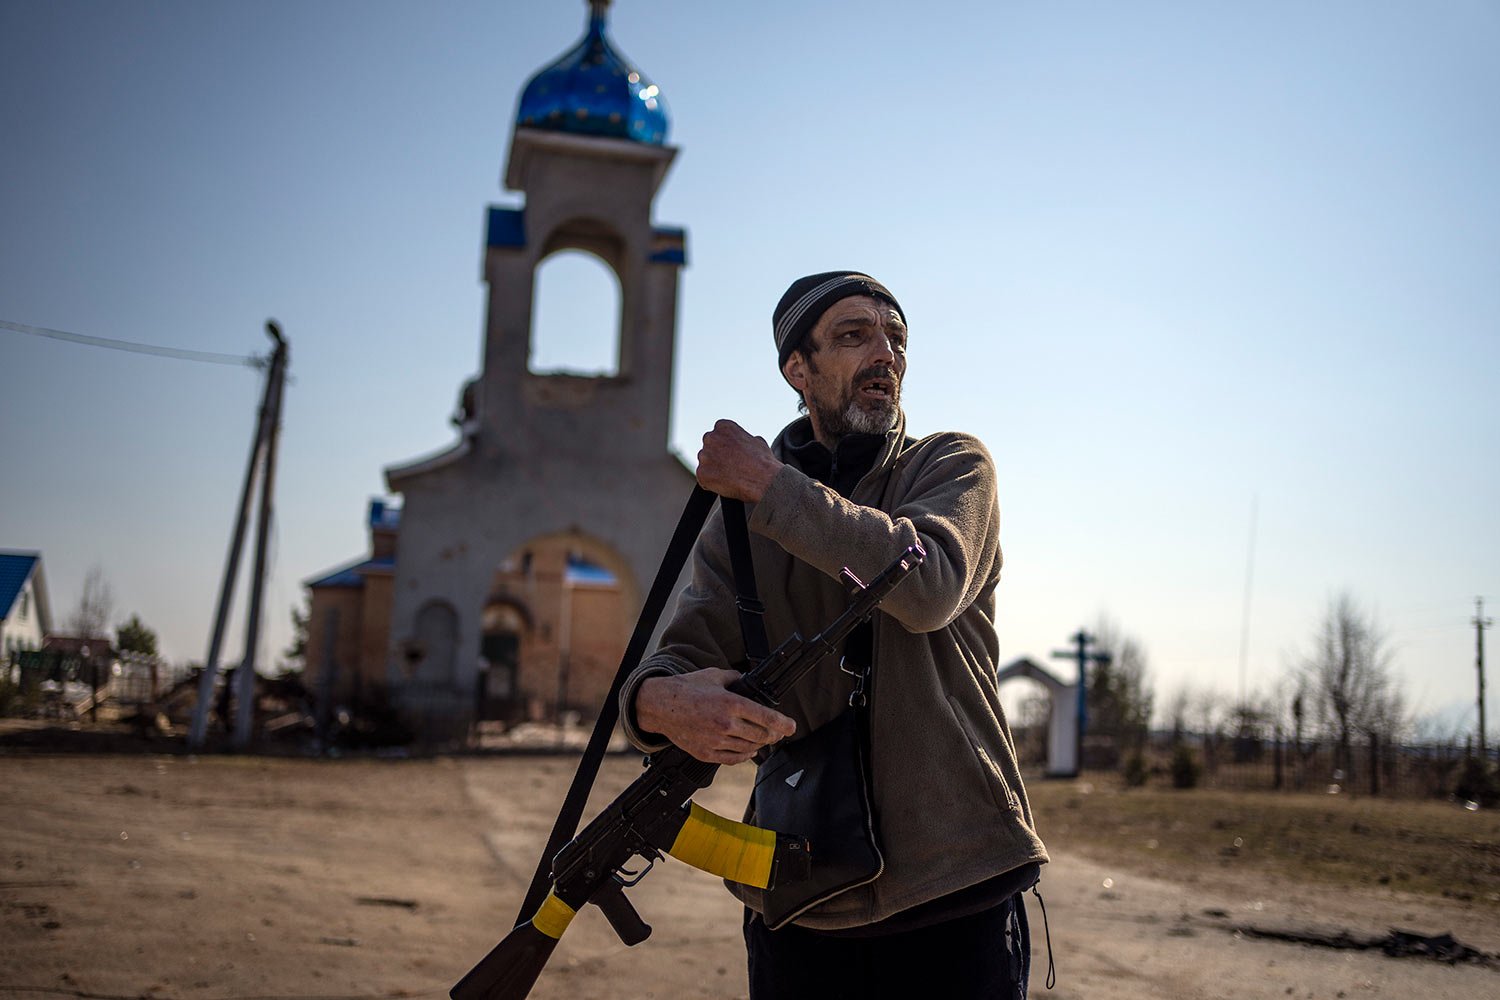  A member of the Ukraine territorial defense unit prepares to go to the front line in Yasnogorodk, on the outskirts of Kyiv, Ukraine, Friday, March 25, 2022. (AP Photo/ (AP Photo/Rodrigo Abd) 